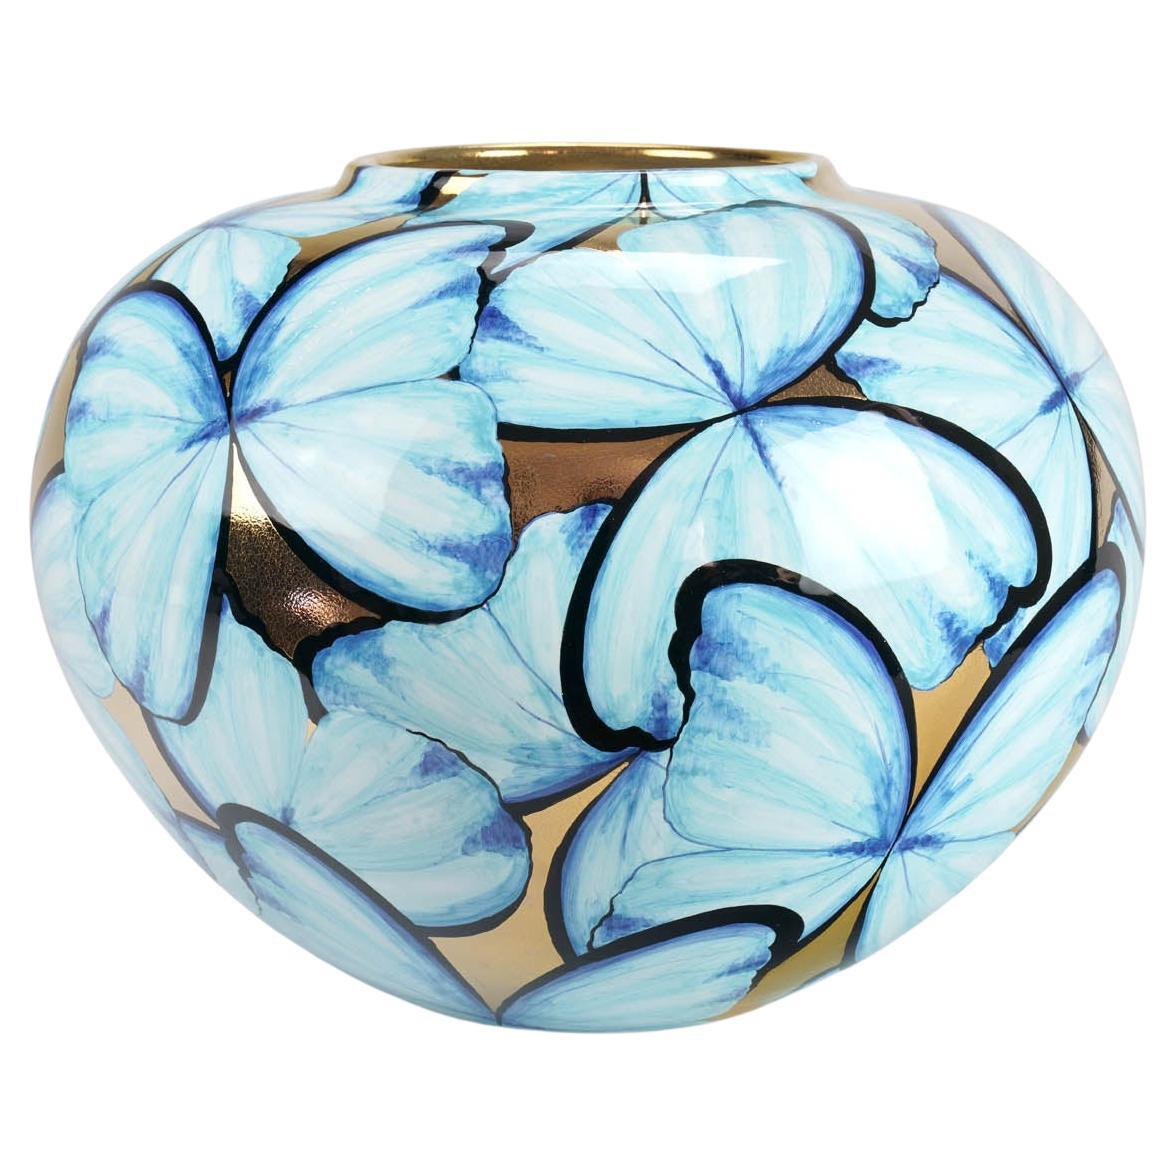 Italian Hand-Painted Ceramic Vase Blue Butterflies on 24kt Gold Accented Surface